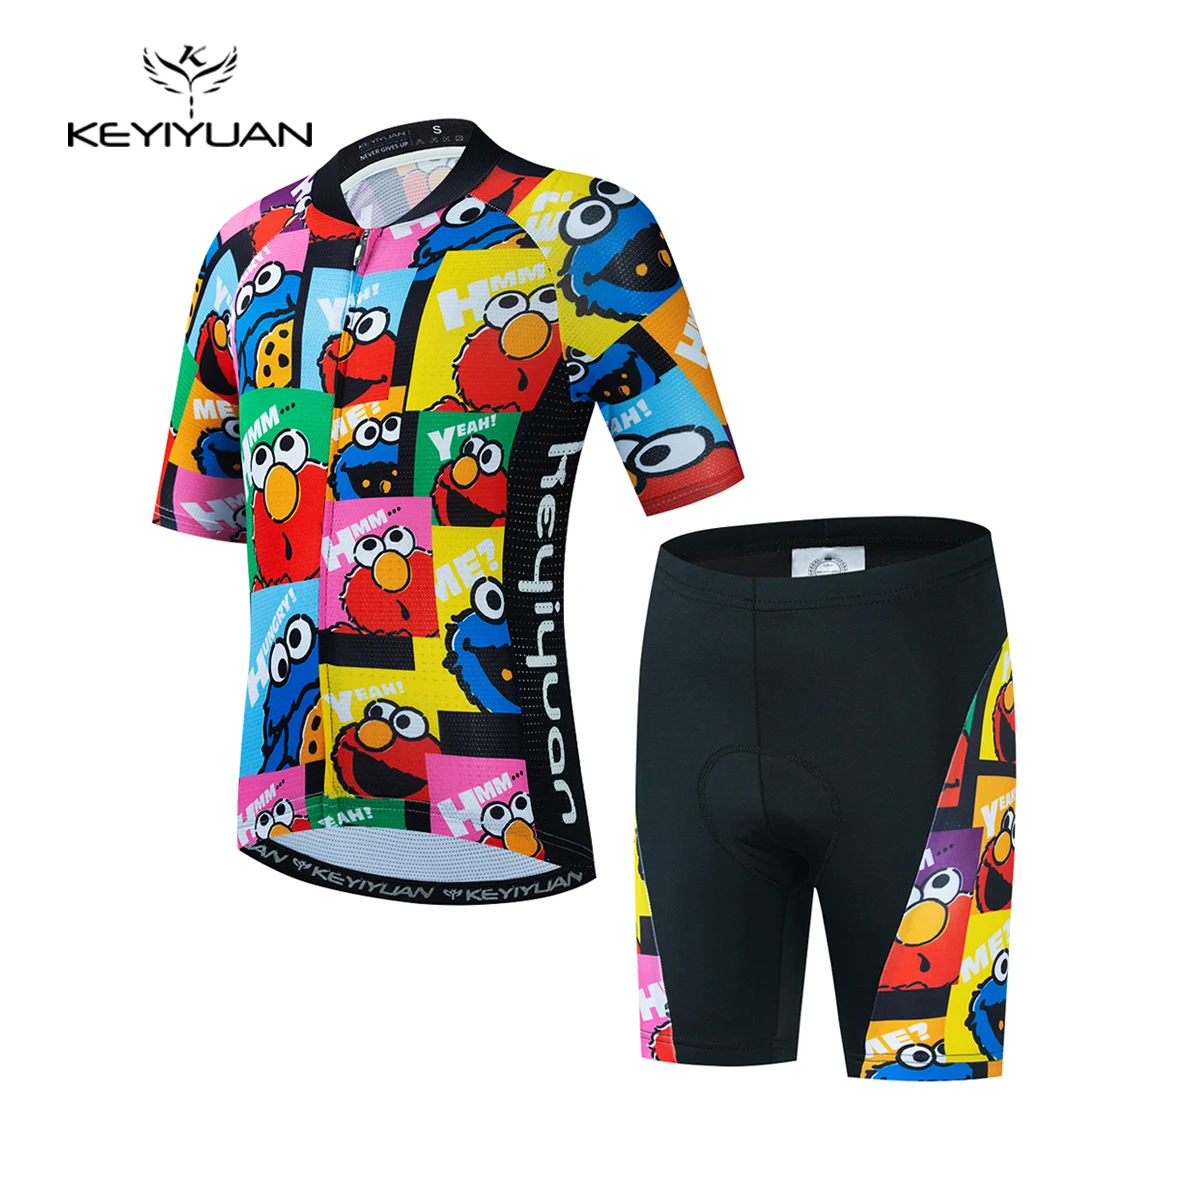 

KEYIYUAN Baby Cycling Jersey Mtb Kids Road Bike Short Sleeve Children's Riding Bicycle Clothes Maillot Cyclisme Camisas Ciclista